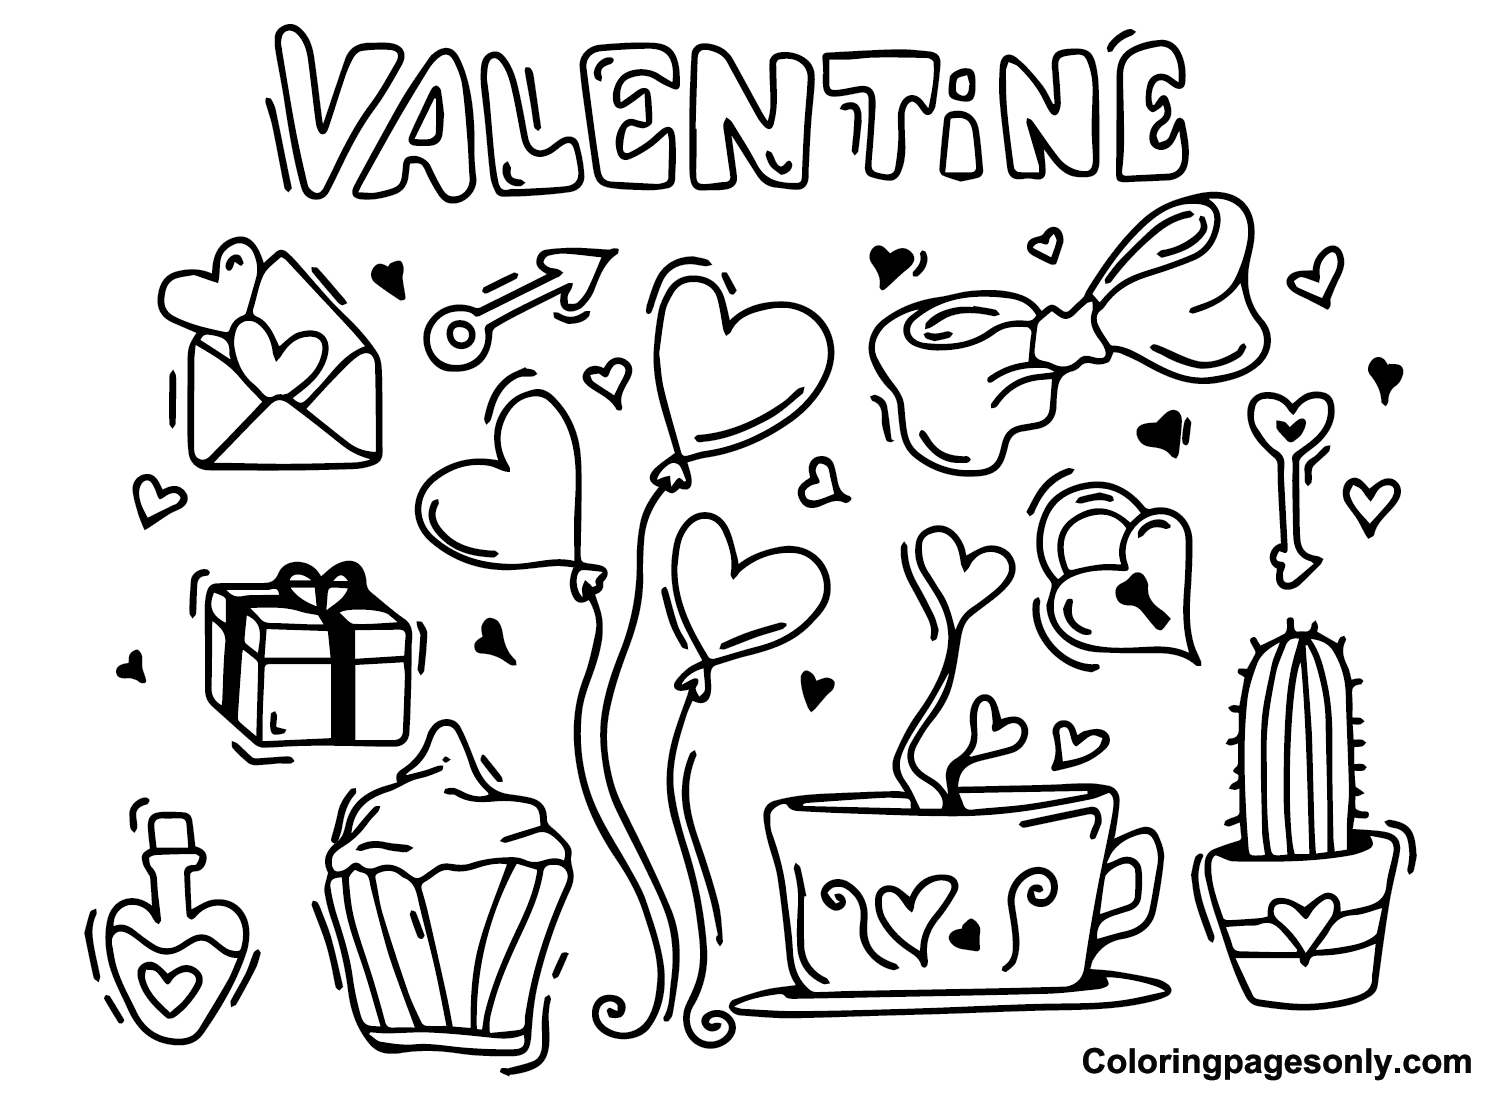 Valentines Day Card Ideas Coloring Pages